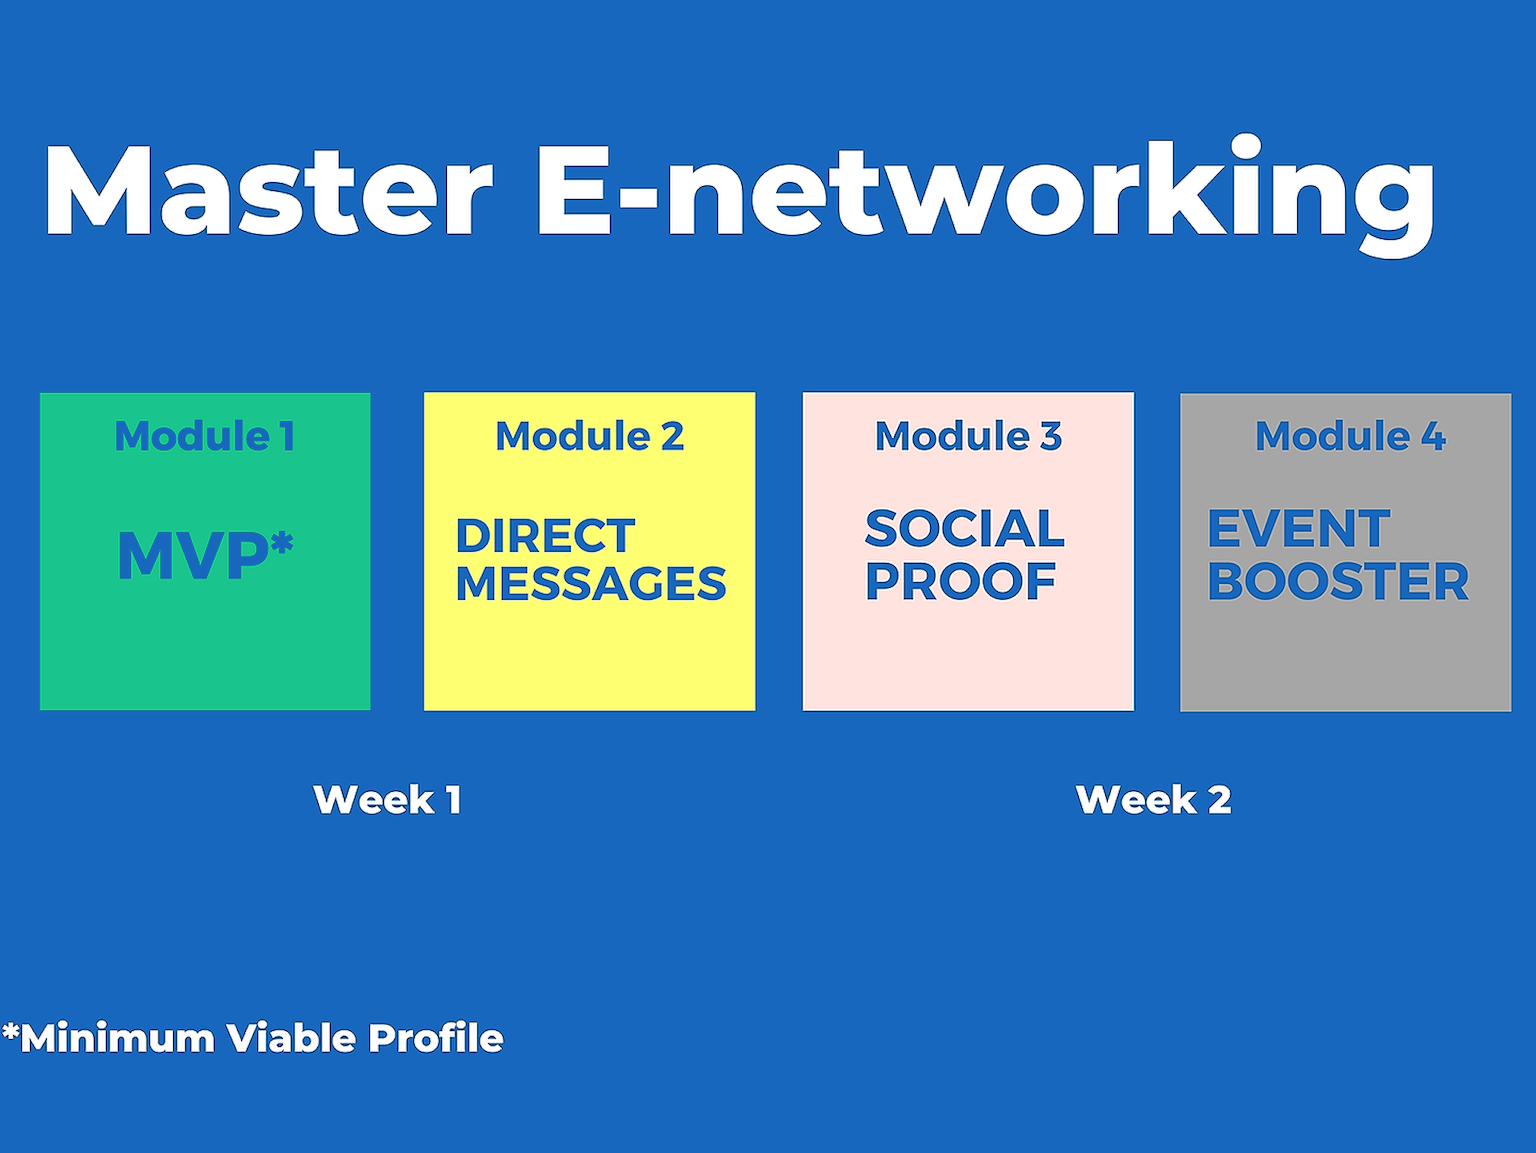 Master E-networking in four steps